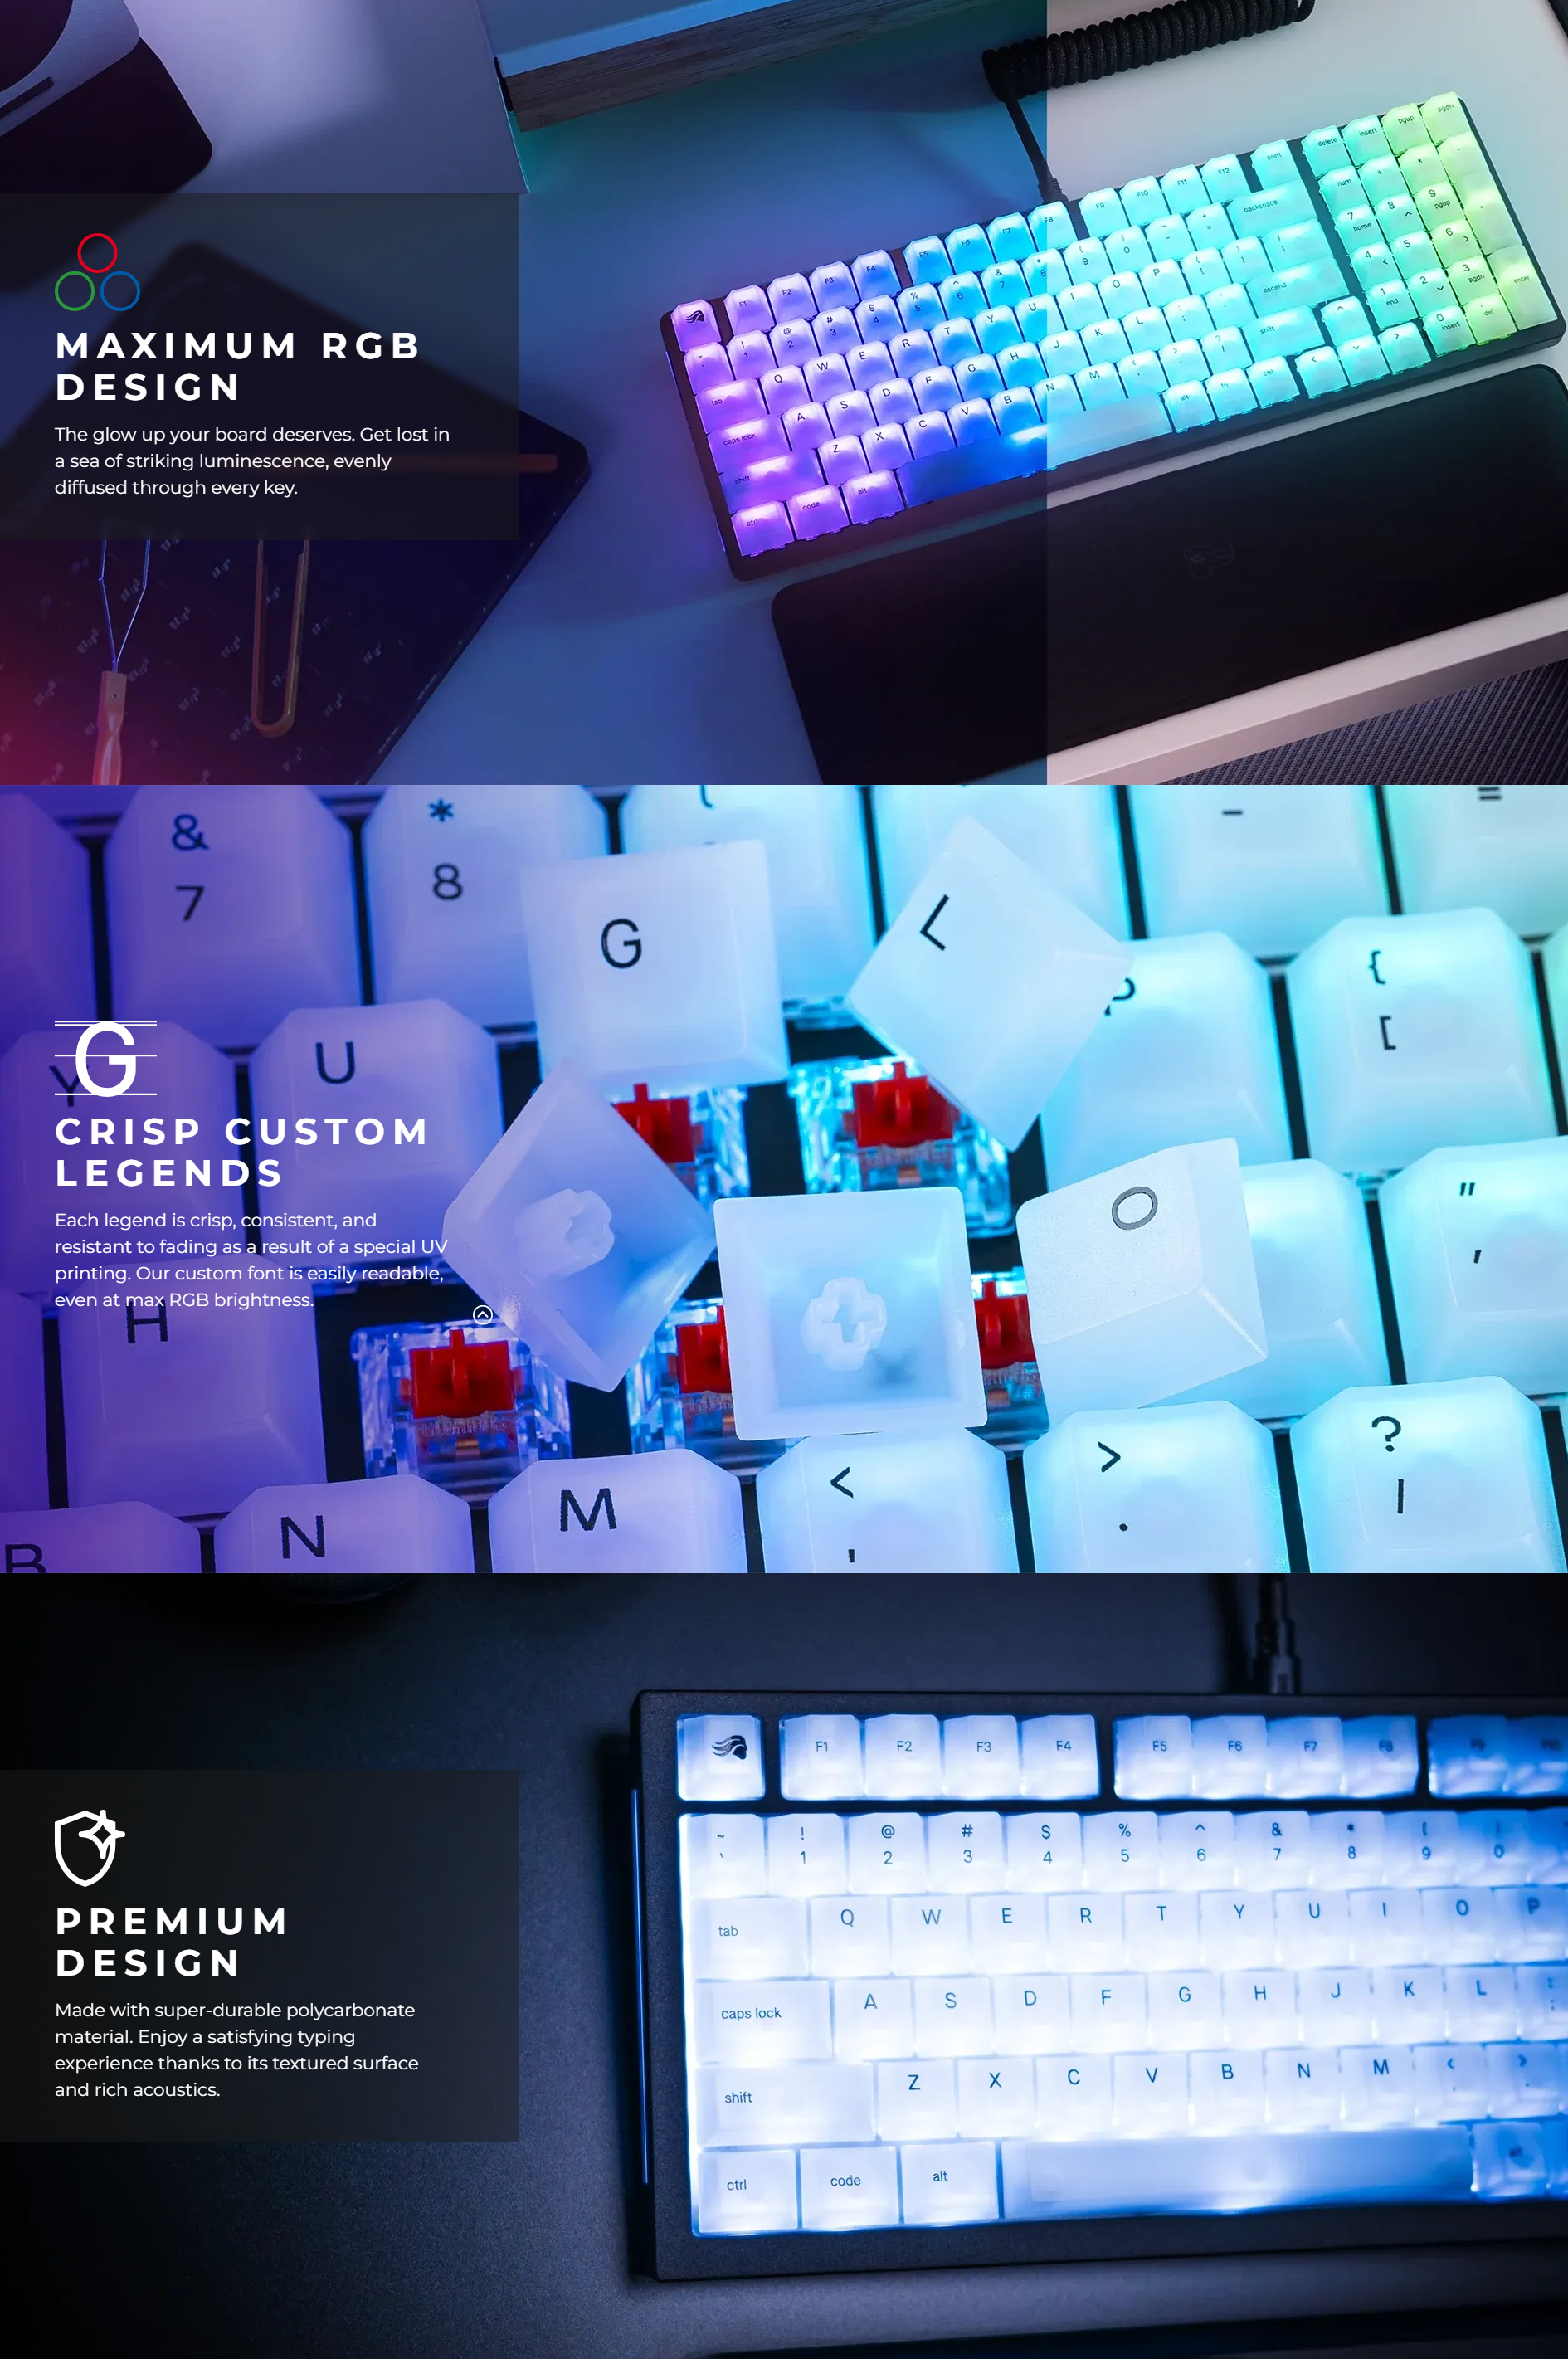 A large marketing image providing additional information about the product Glorious Polychroma Cherry Profile RGB Keycaps 115pcs - Additional alt info not provided